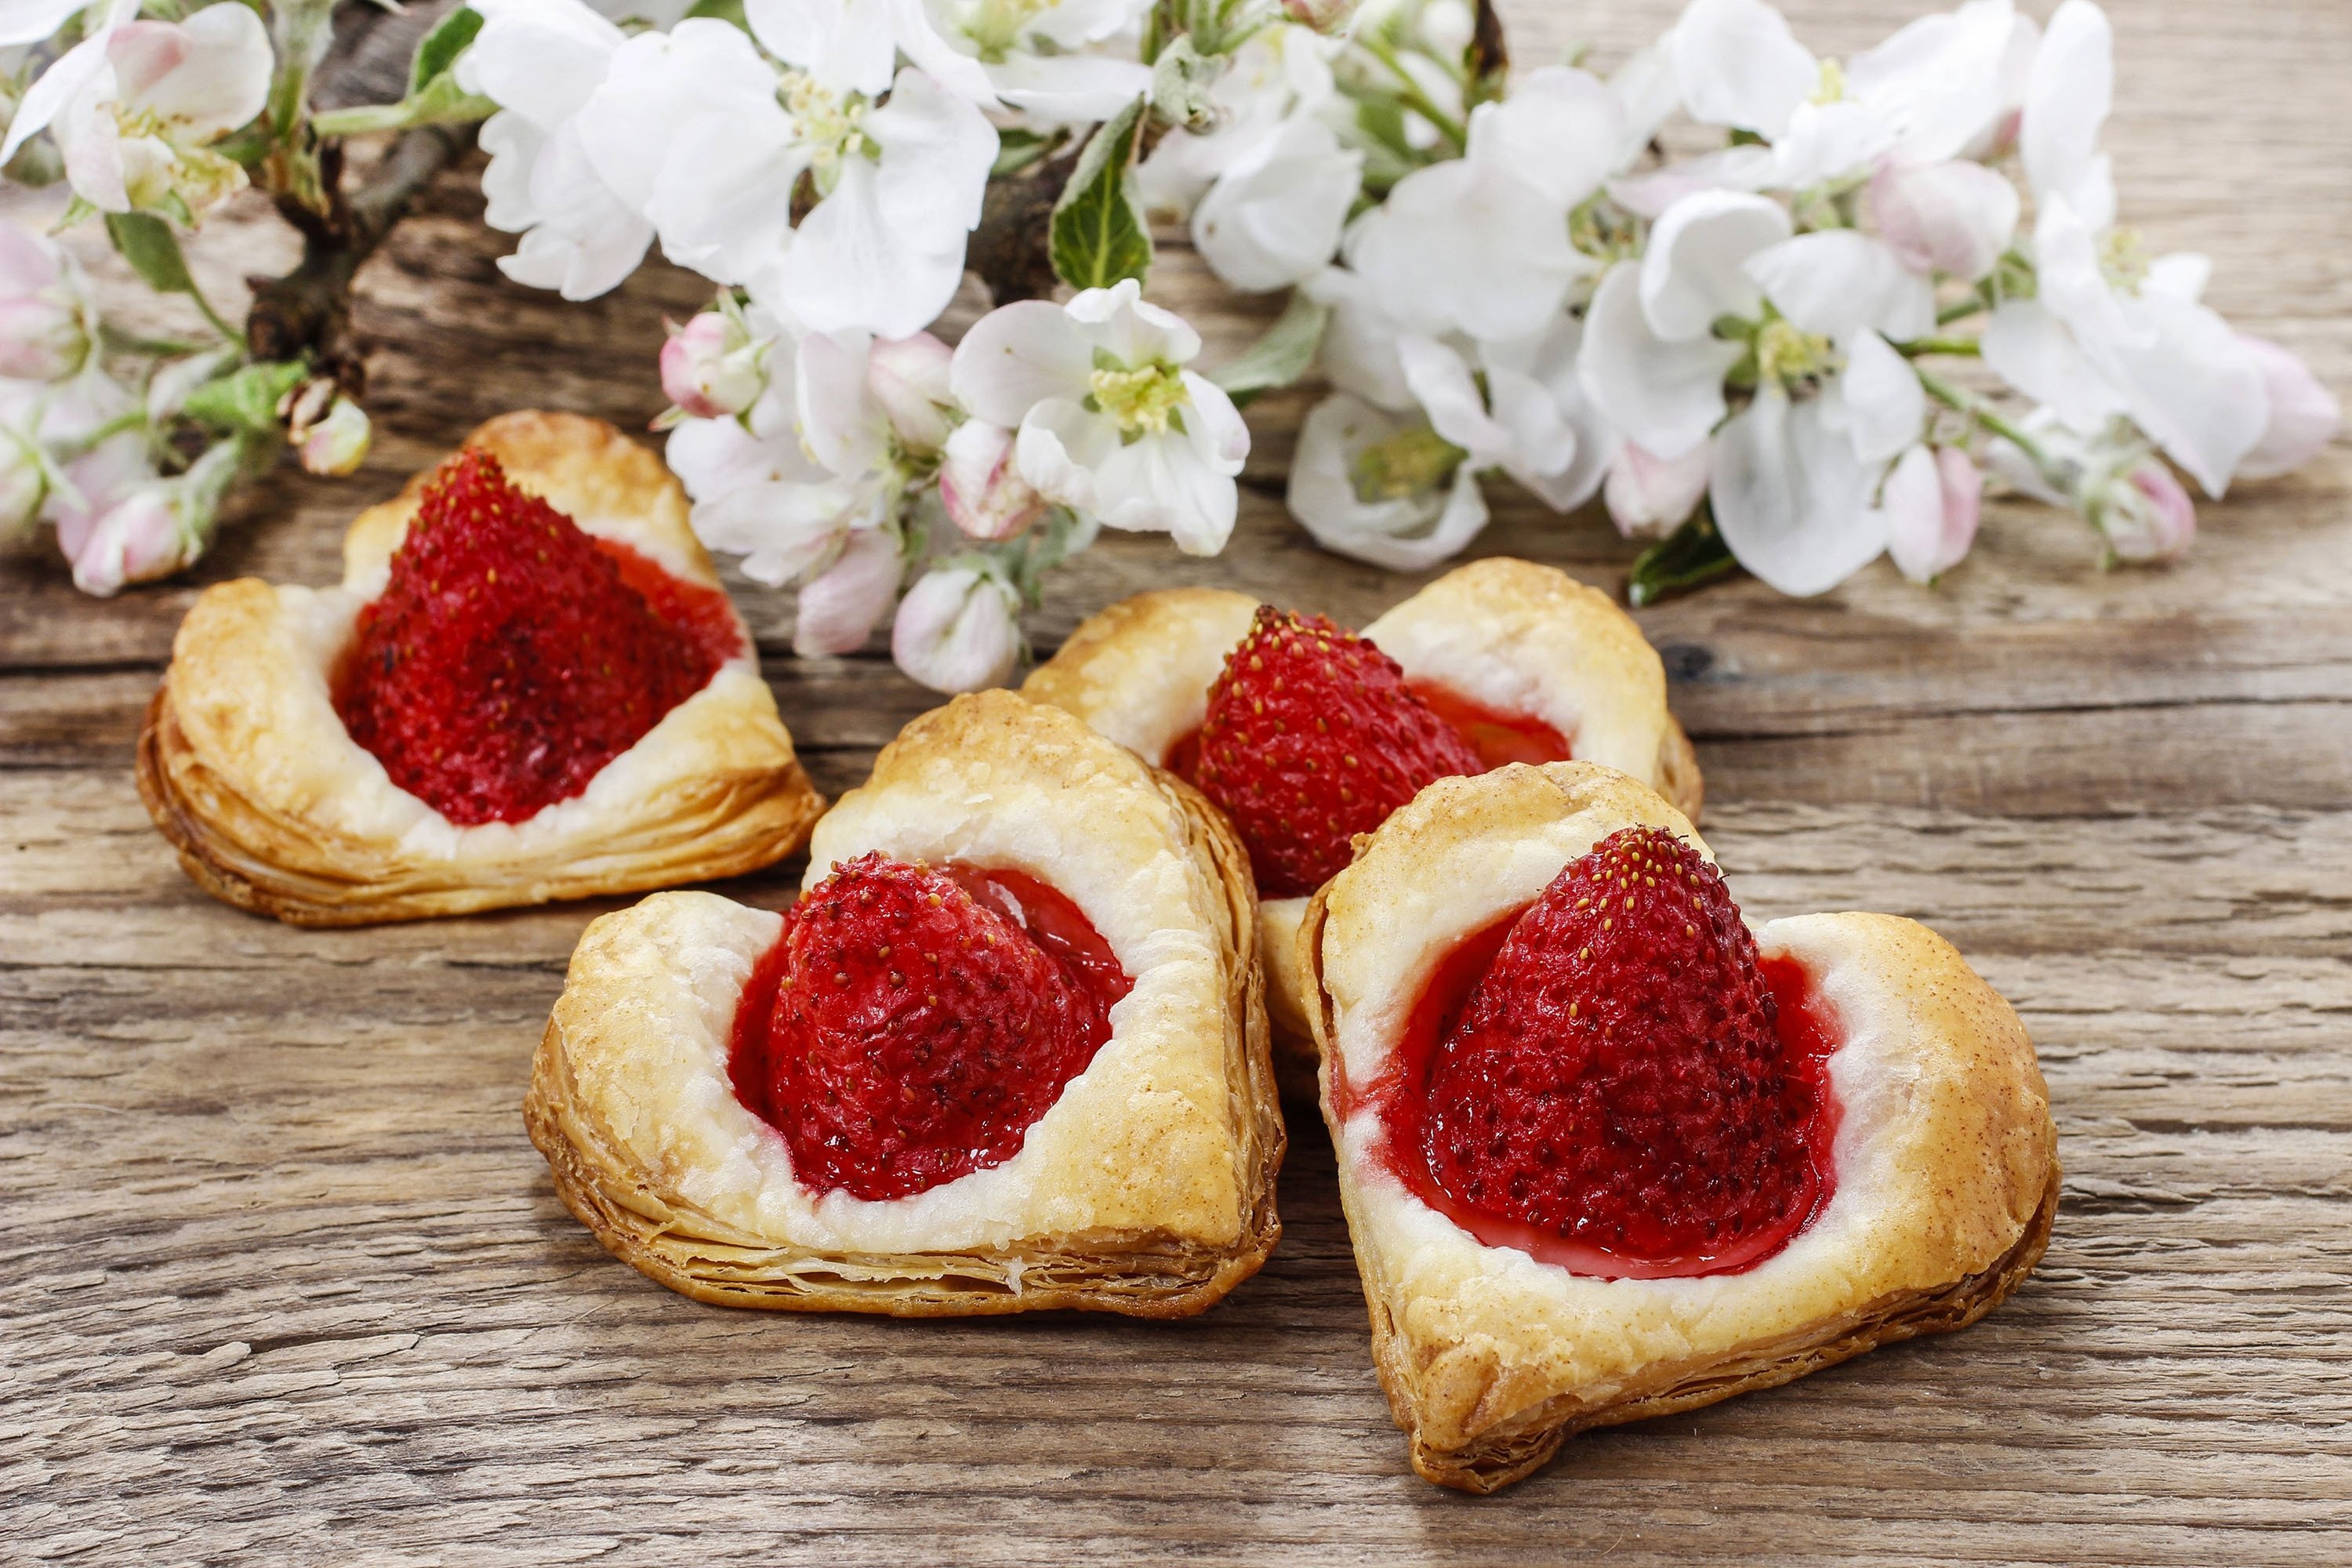 Puff pastry cookies in the shape of hearts. (Shutterstock Photo)